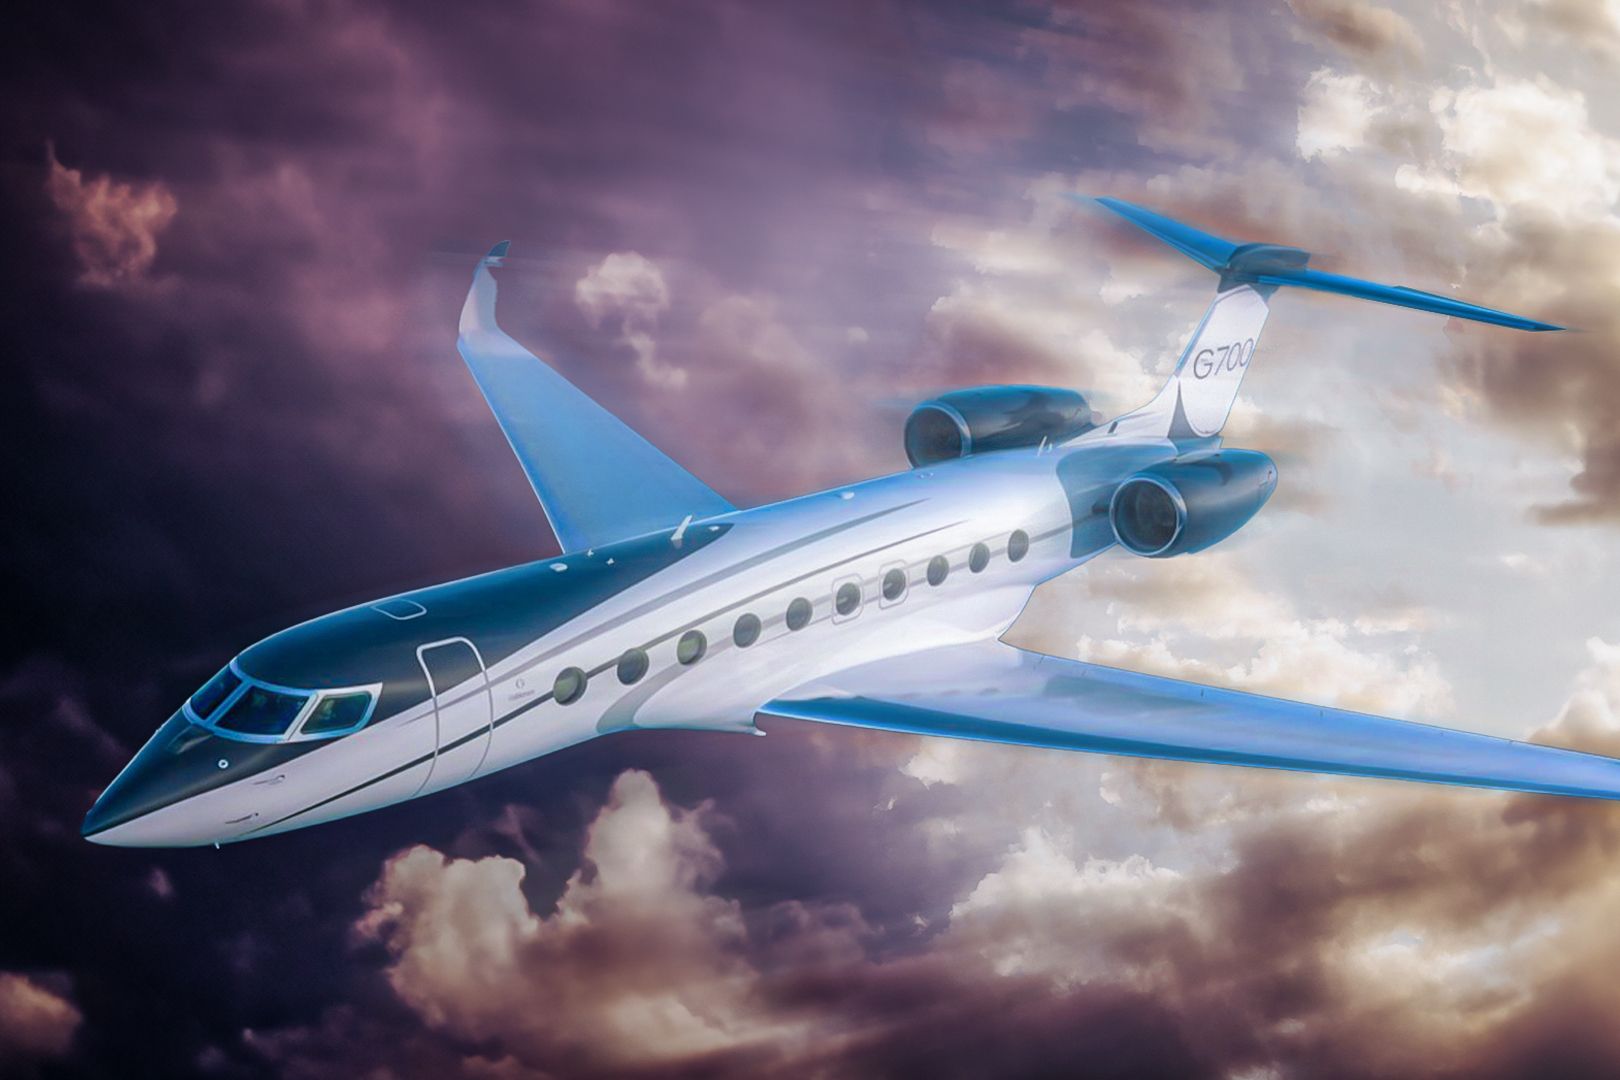 Why Is Gulfstream Such A Popular Private Jet Manufacturer?